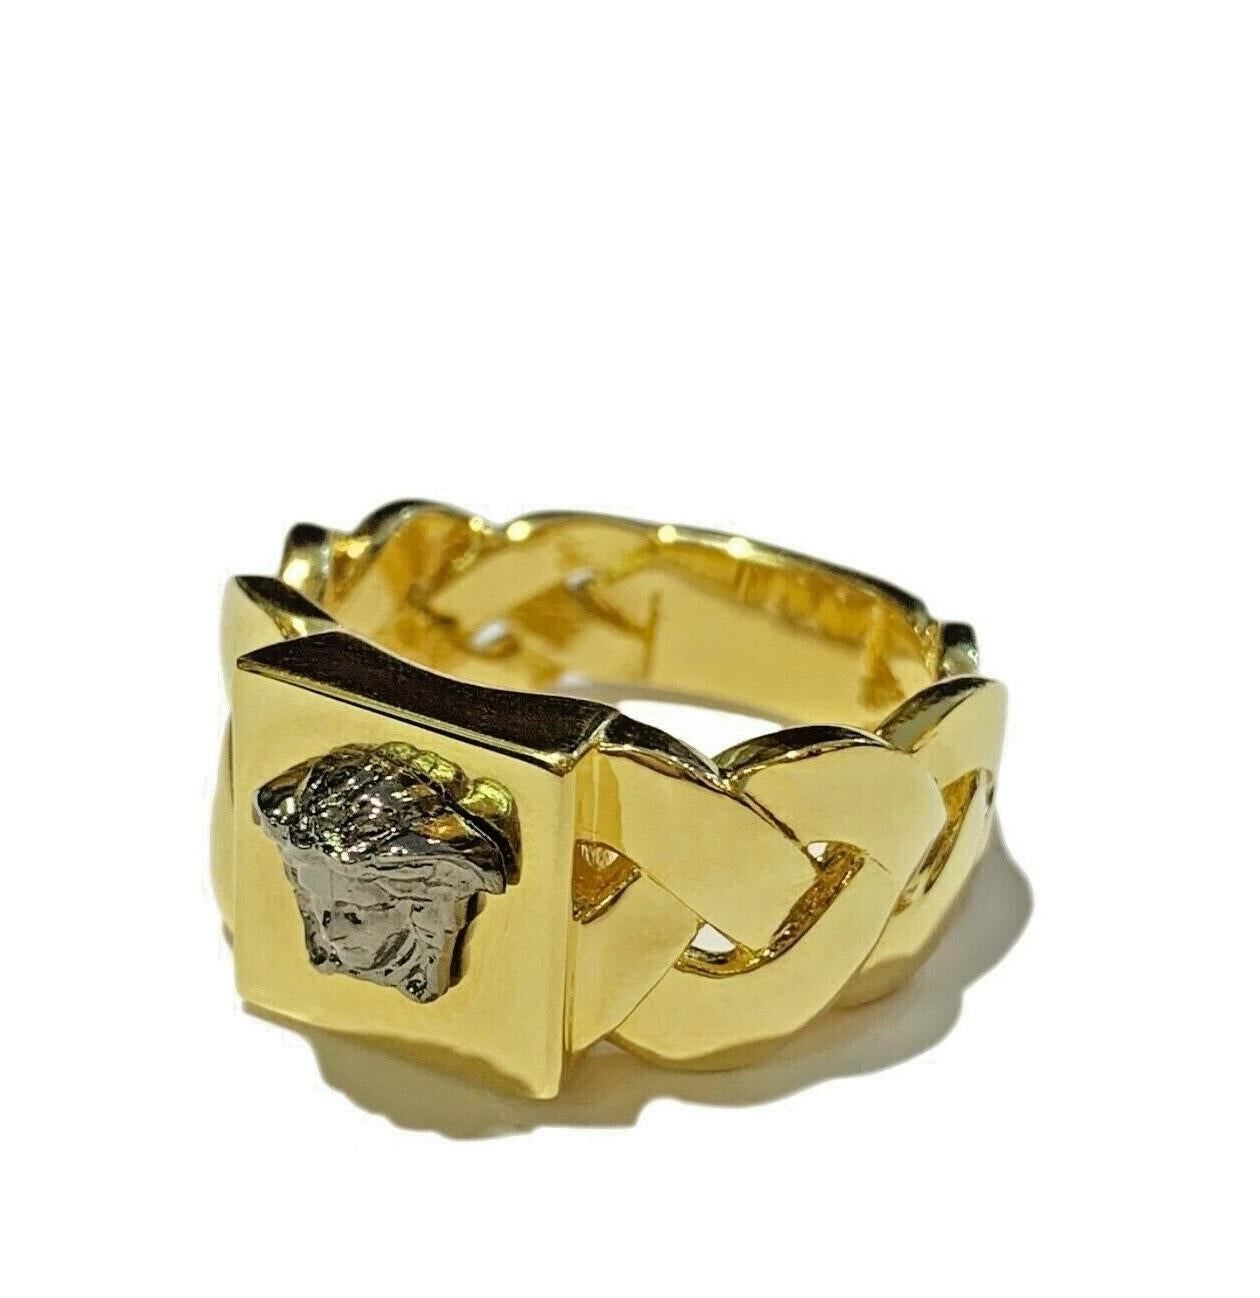 Good condition. Display model
Gold tone
Ring size: 9
Width: 6-11.7mm
Hypoallergenic, lead and nickel free
Comes with Versace box